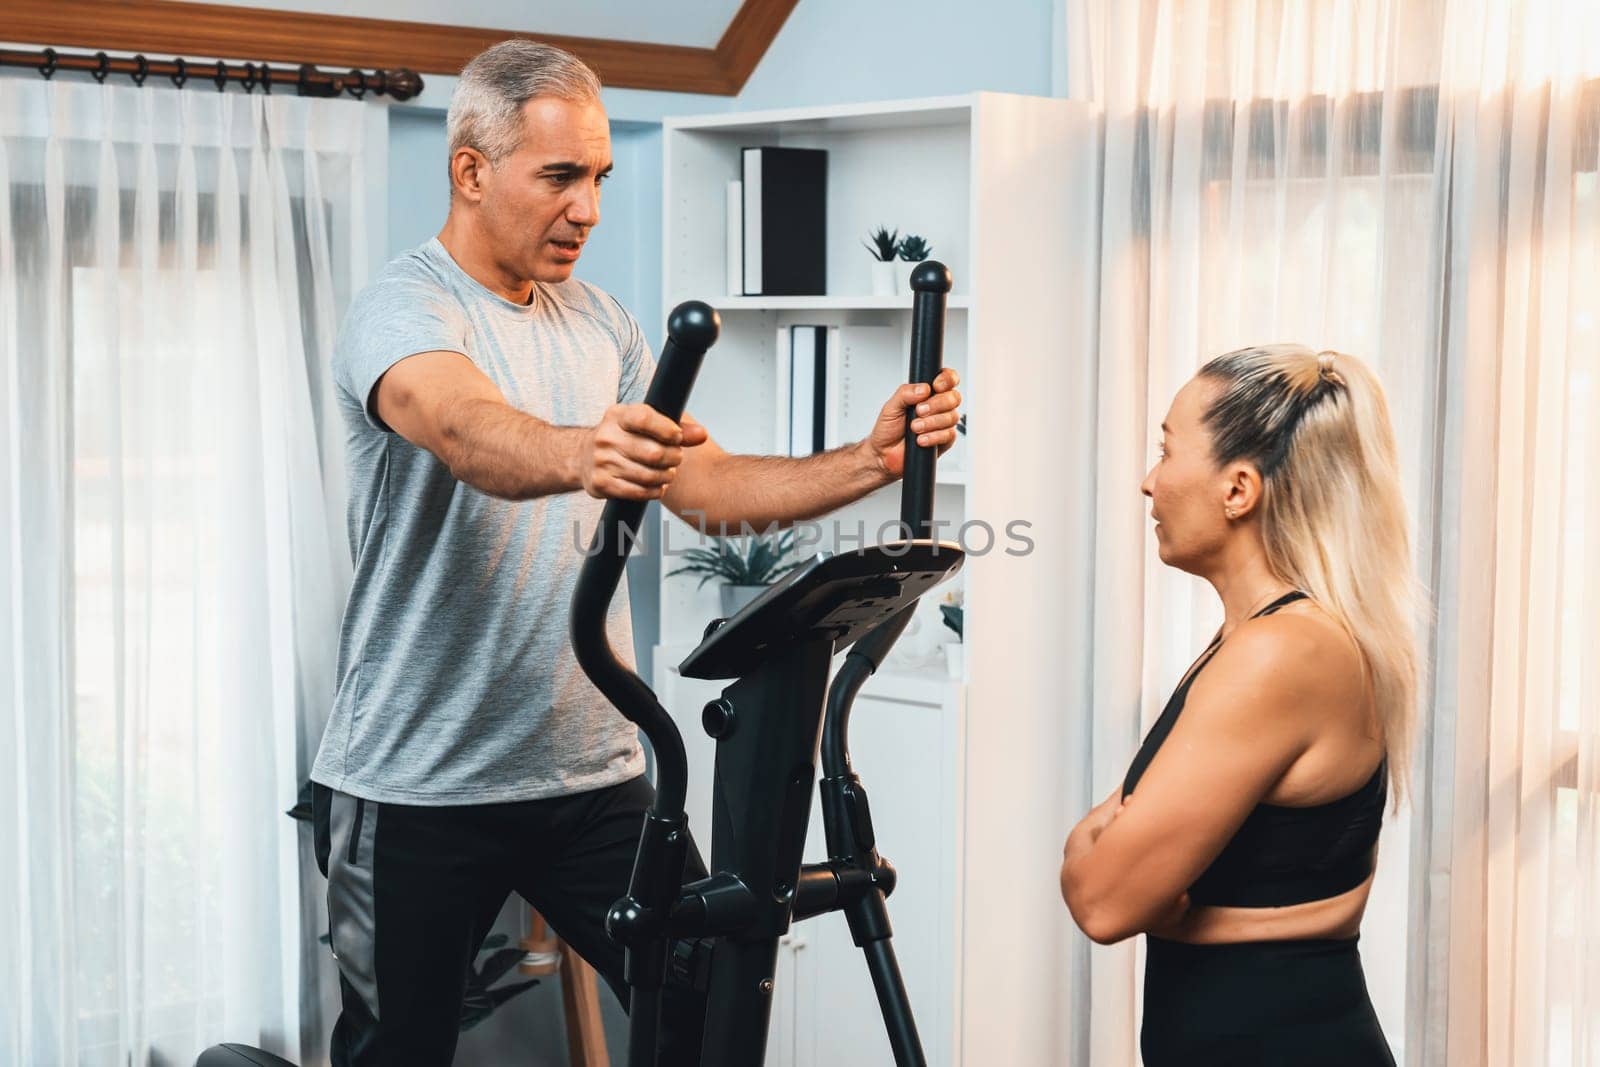 Active senior couple running on elliptical running machine at home together as fitness healthy lifestyle and body care after retirement for pensioner. Clout